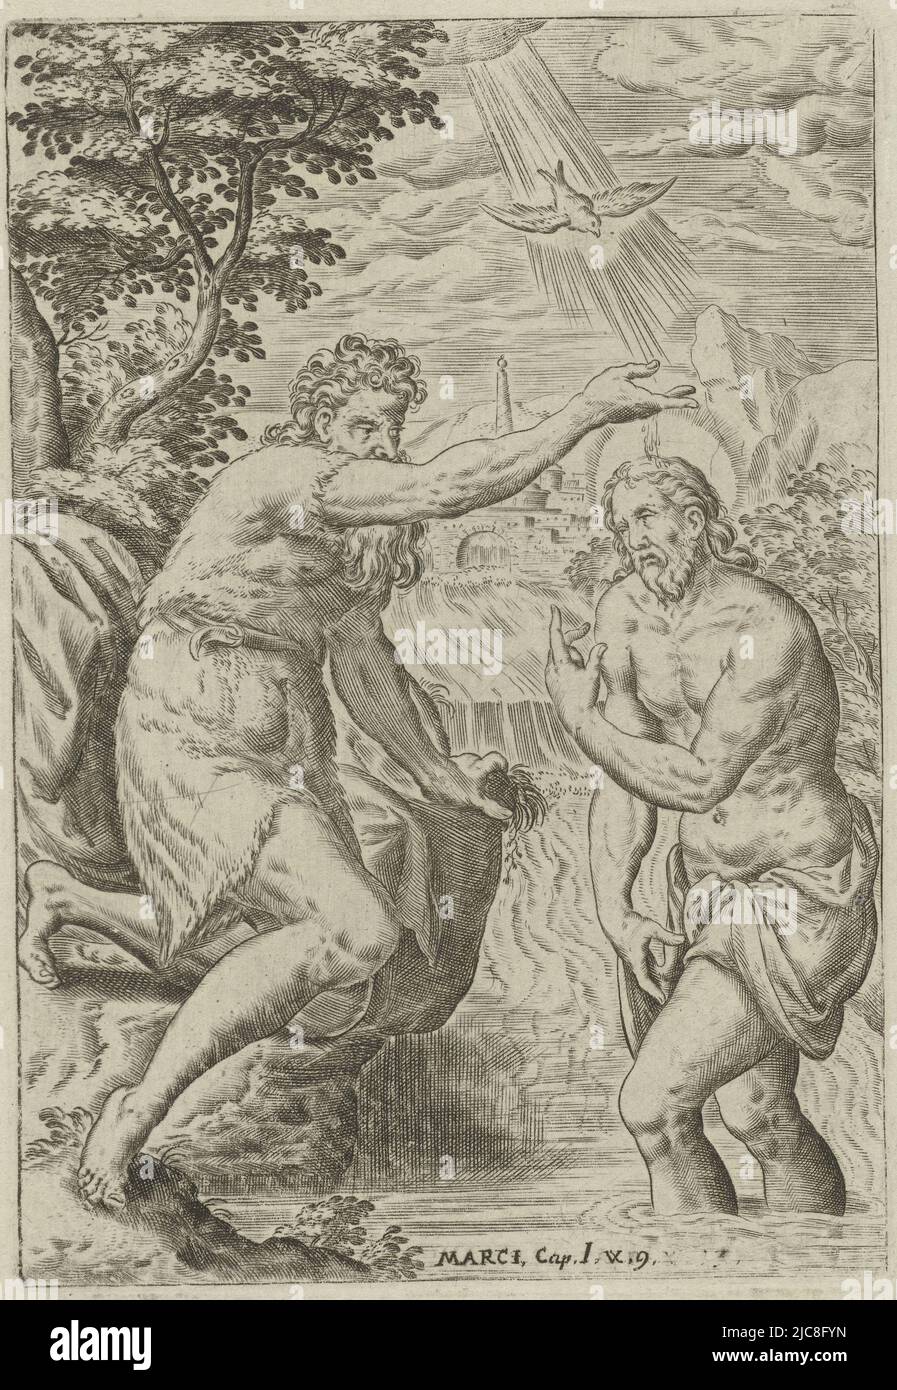 Book illustration accompanying the story of the baptism of Christ (Mark 1:9). Christ is baptized by John the Baptist in the Jordan River. During the baptism, the Holy Spirit descends (as a dove) from heaven and settles on Christ's head. The print includes a caption with a reference to the accompanying Bible passage, Baptism of Christ Scenes from the Bible Biblia sacra , print maker: Abraham de Bruyn, Gerard van Groeningen, Antwerp, 1583, paper, engraving, h 165 mm × w 113 mm Stock Photo